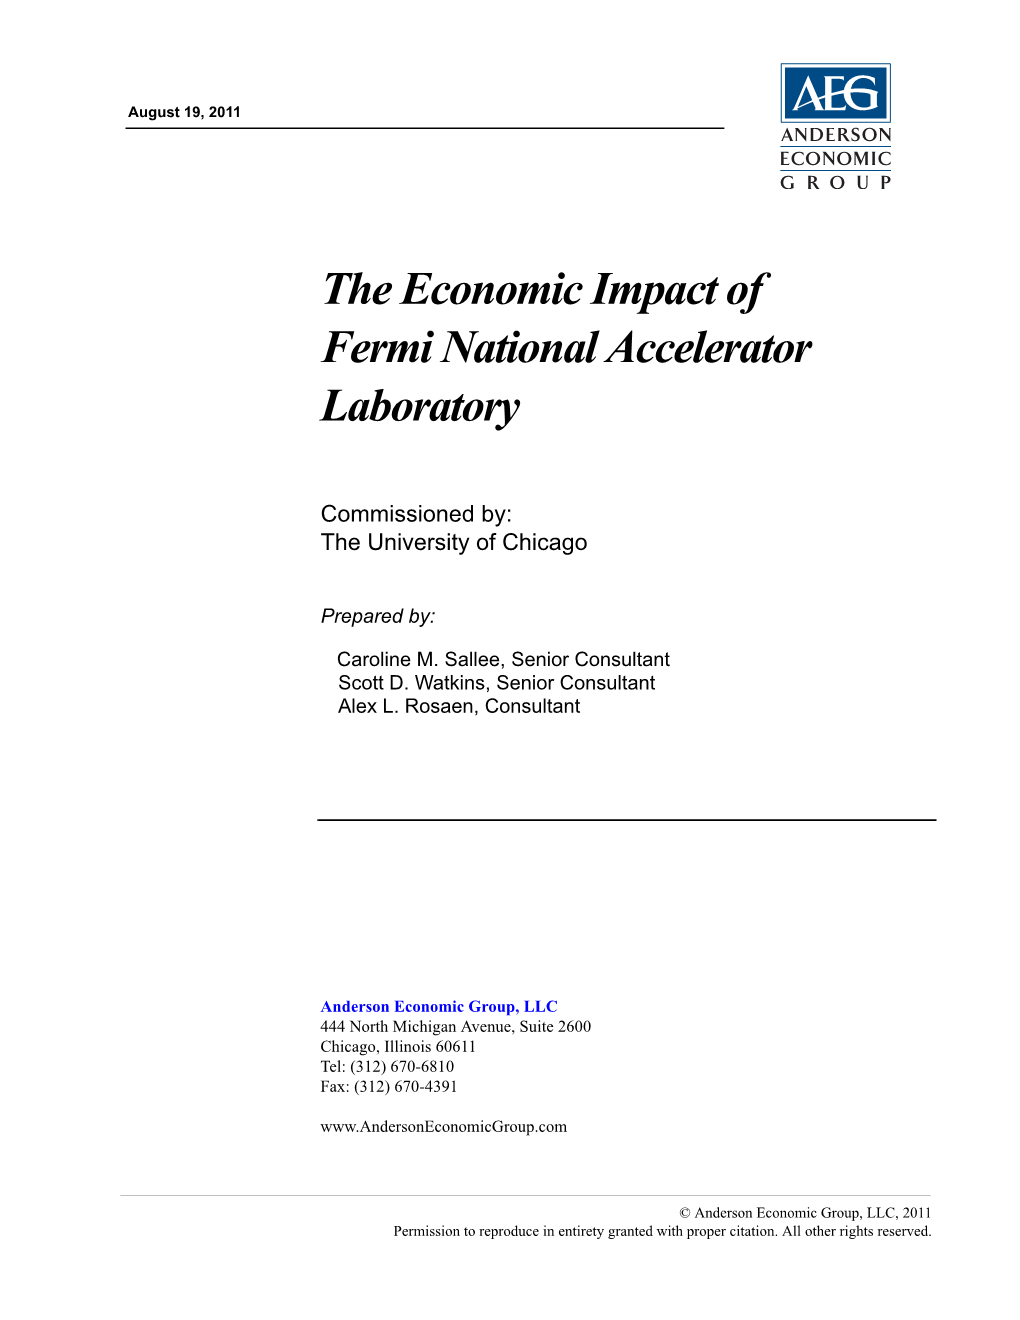 Economic Impact of Fermilab’S Operations on the Chicago Region and the State of Illinois As a Whole